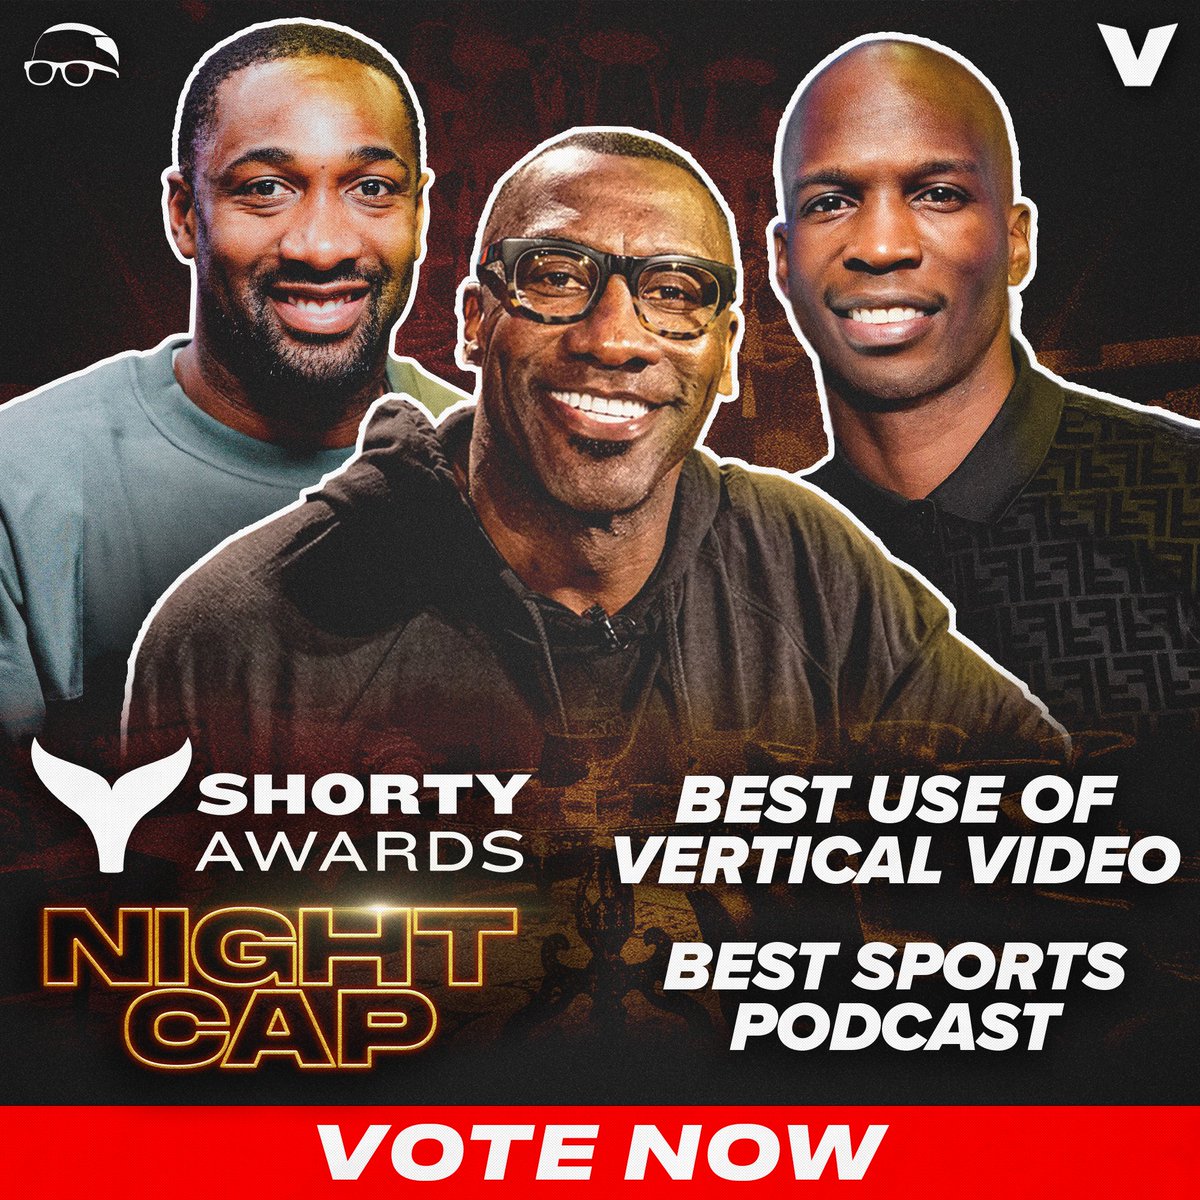 ❗️NightCap is nominated for two Shorty Awards. Let's bring it home for Unc, Ocho & Gil ❗️ Vote now: shortyawards.com/16th/nightcap-…